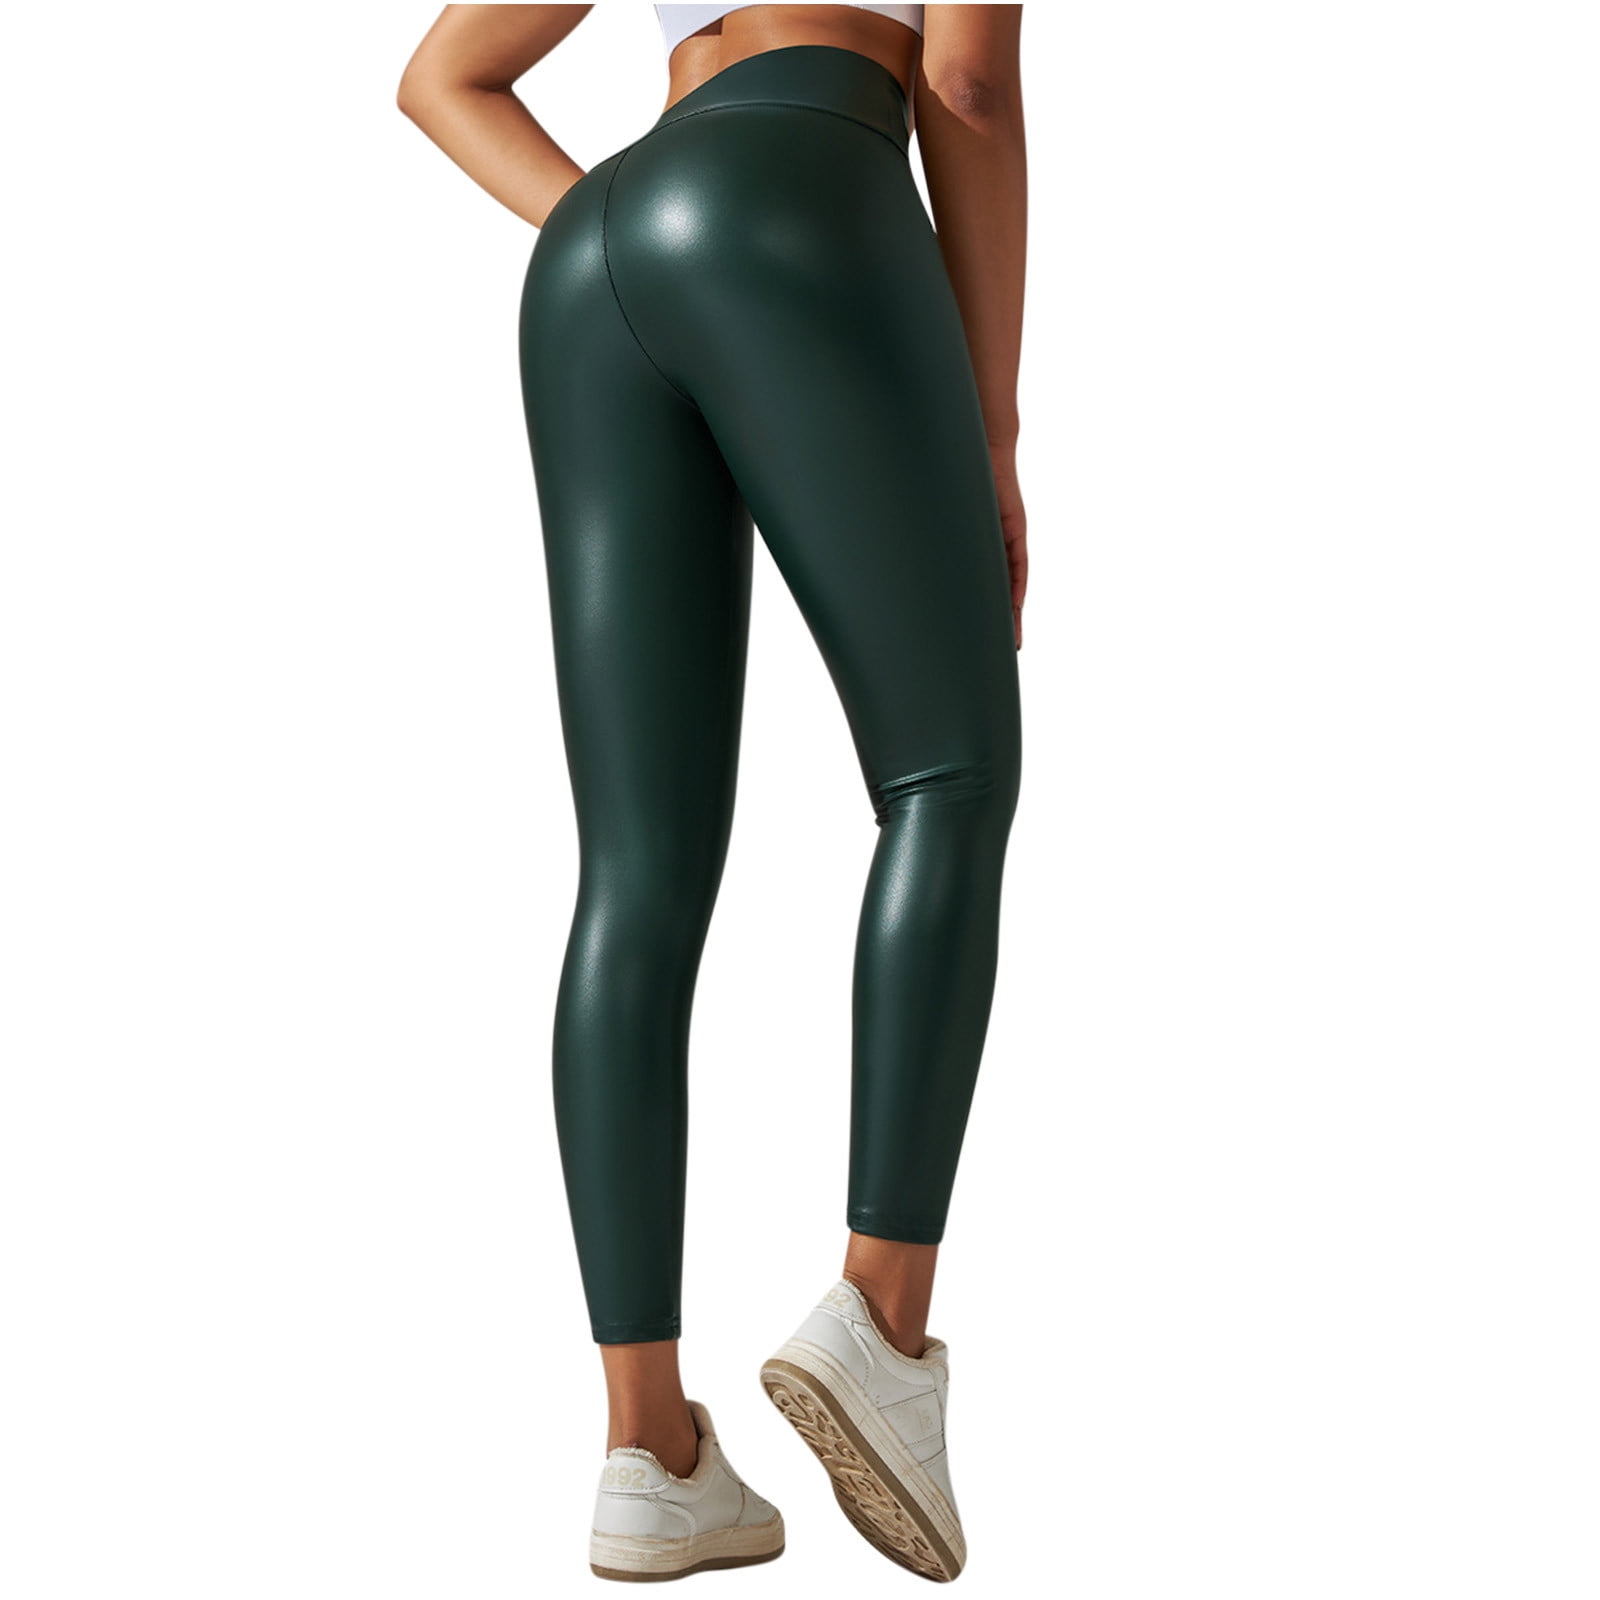 YANHAIGONG Leggings for Women Leather Faux Stretchy High Waisted